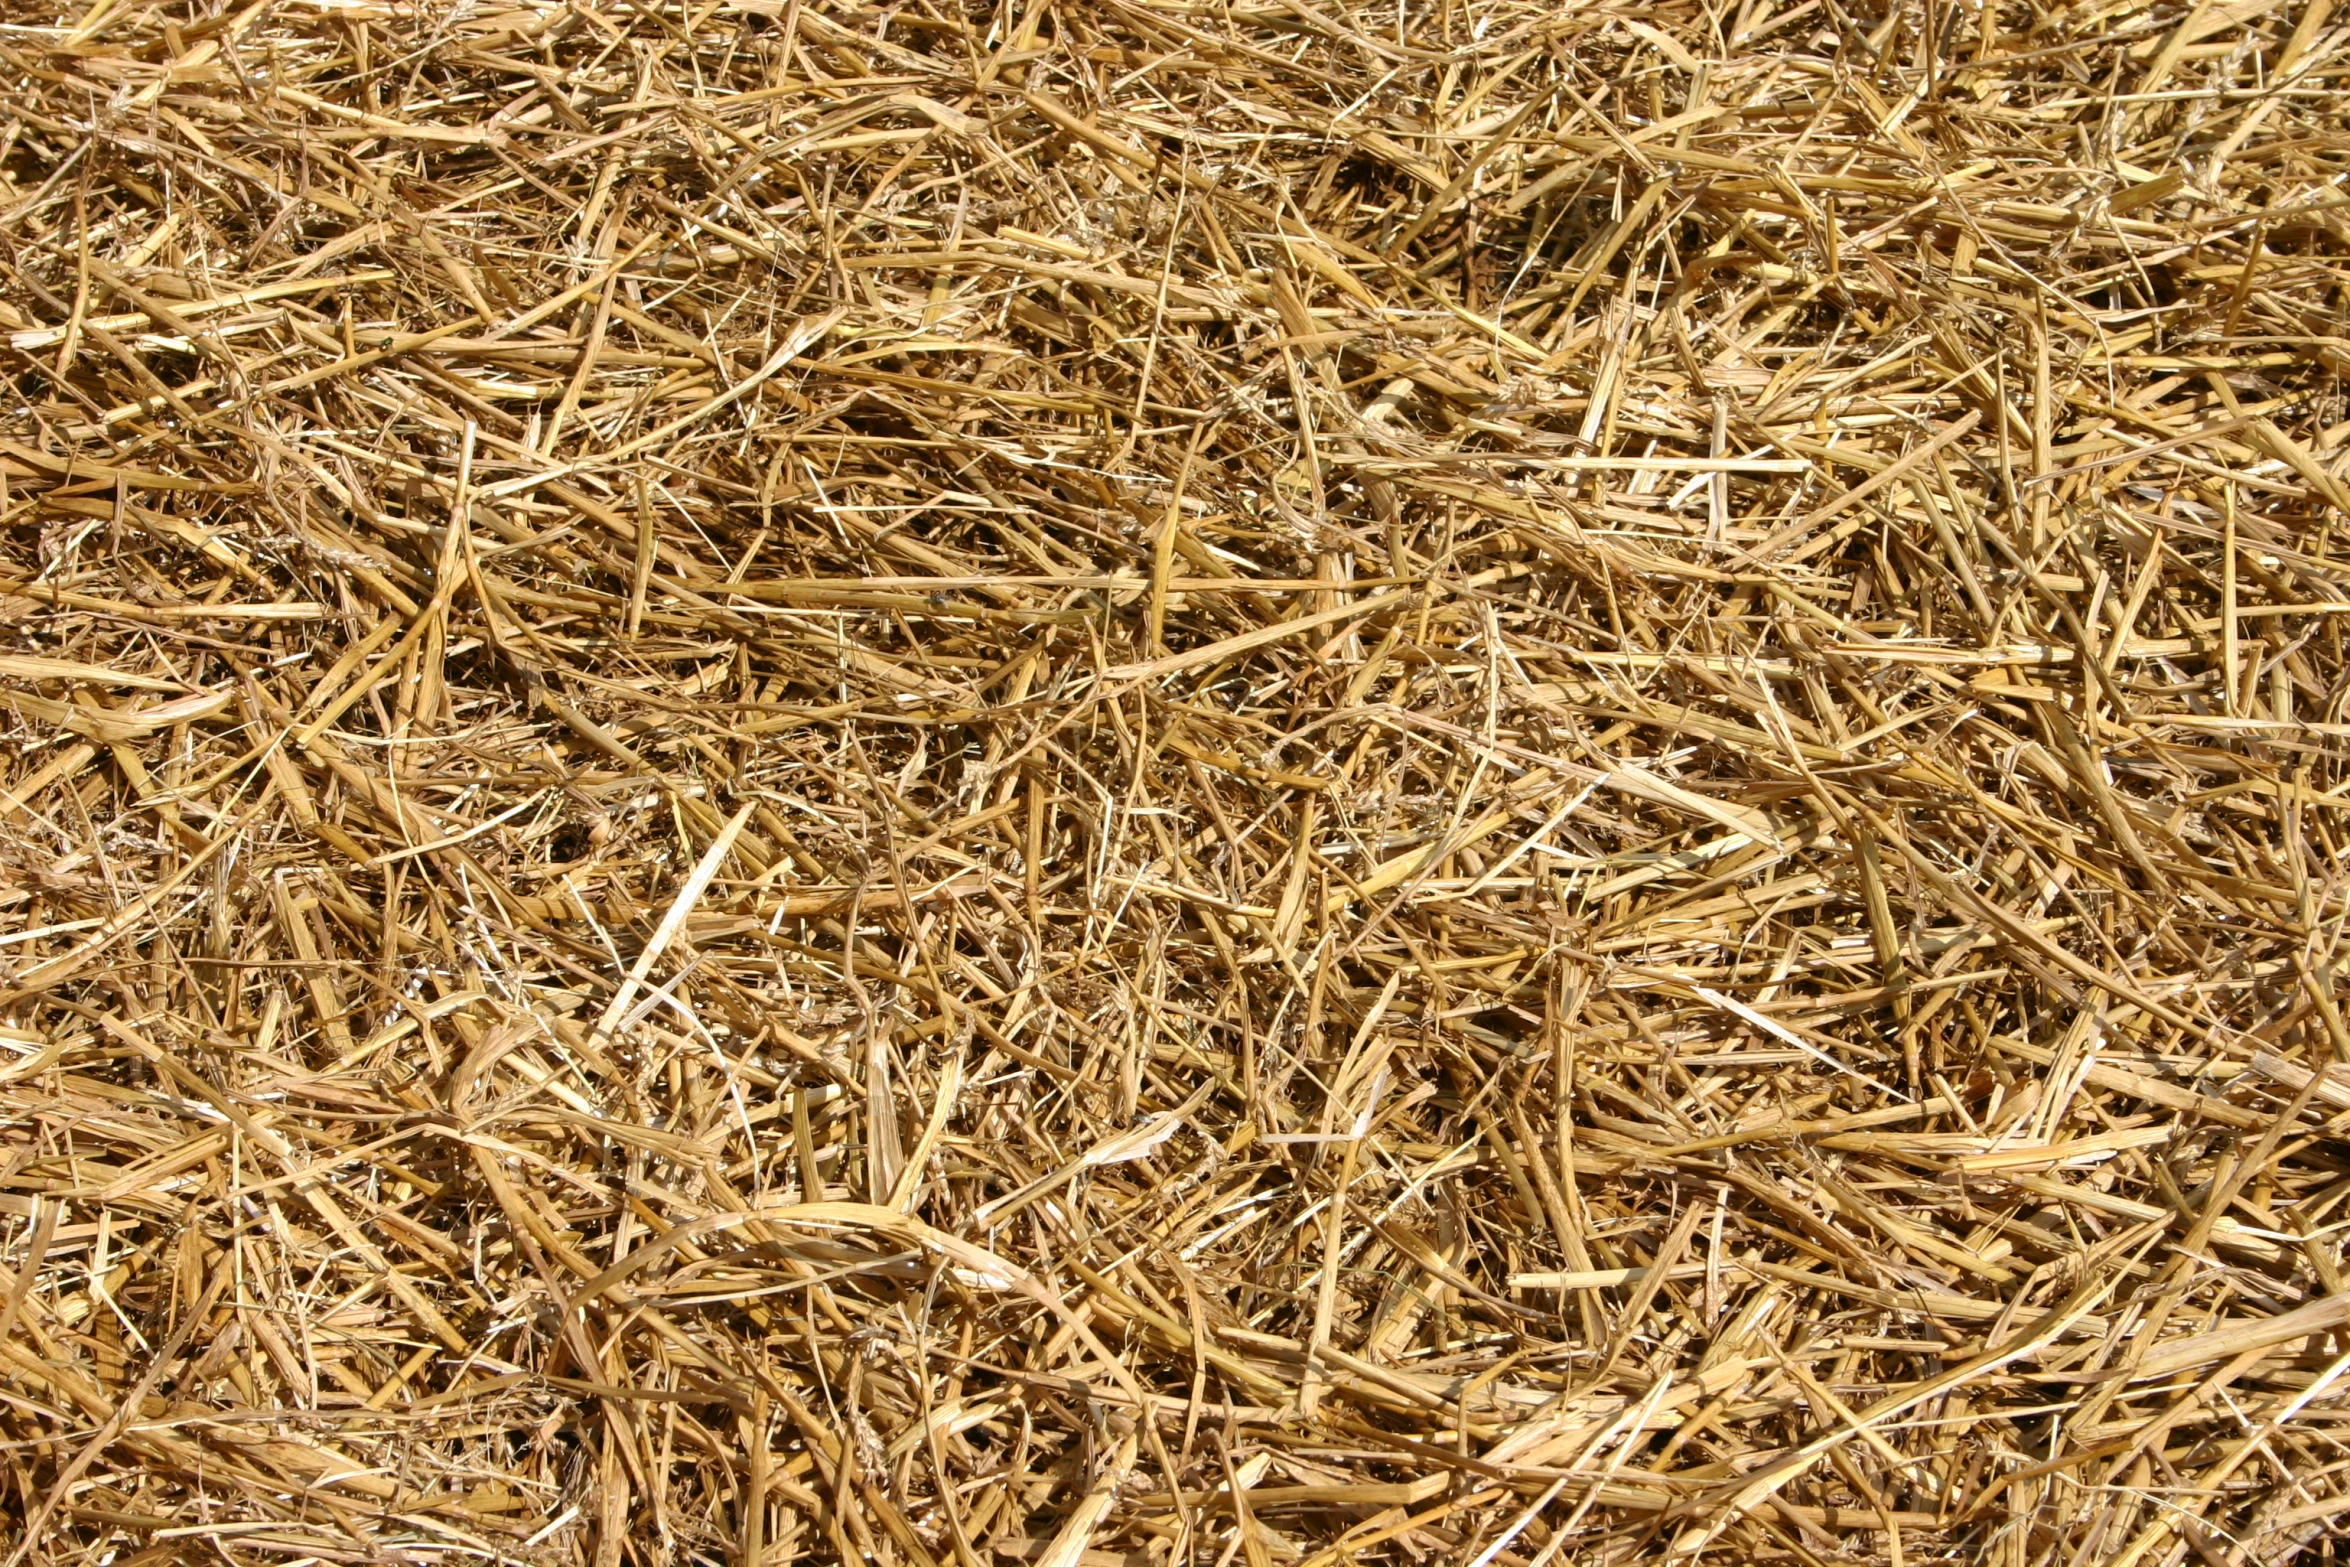 a close up view of some dry grass